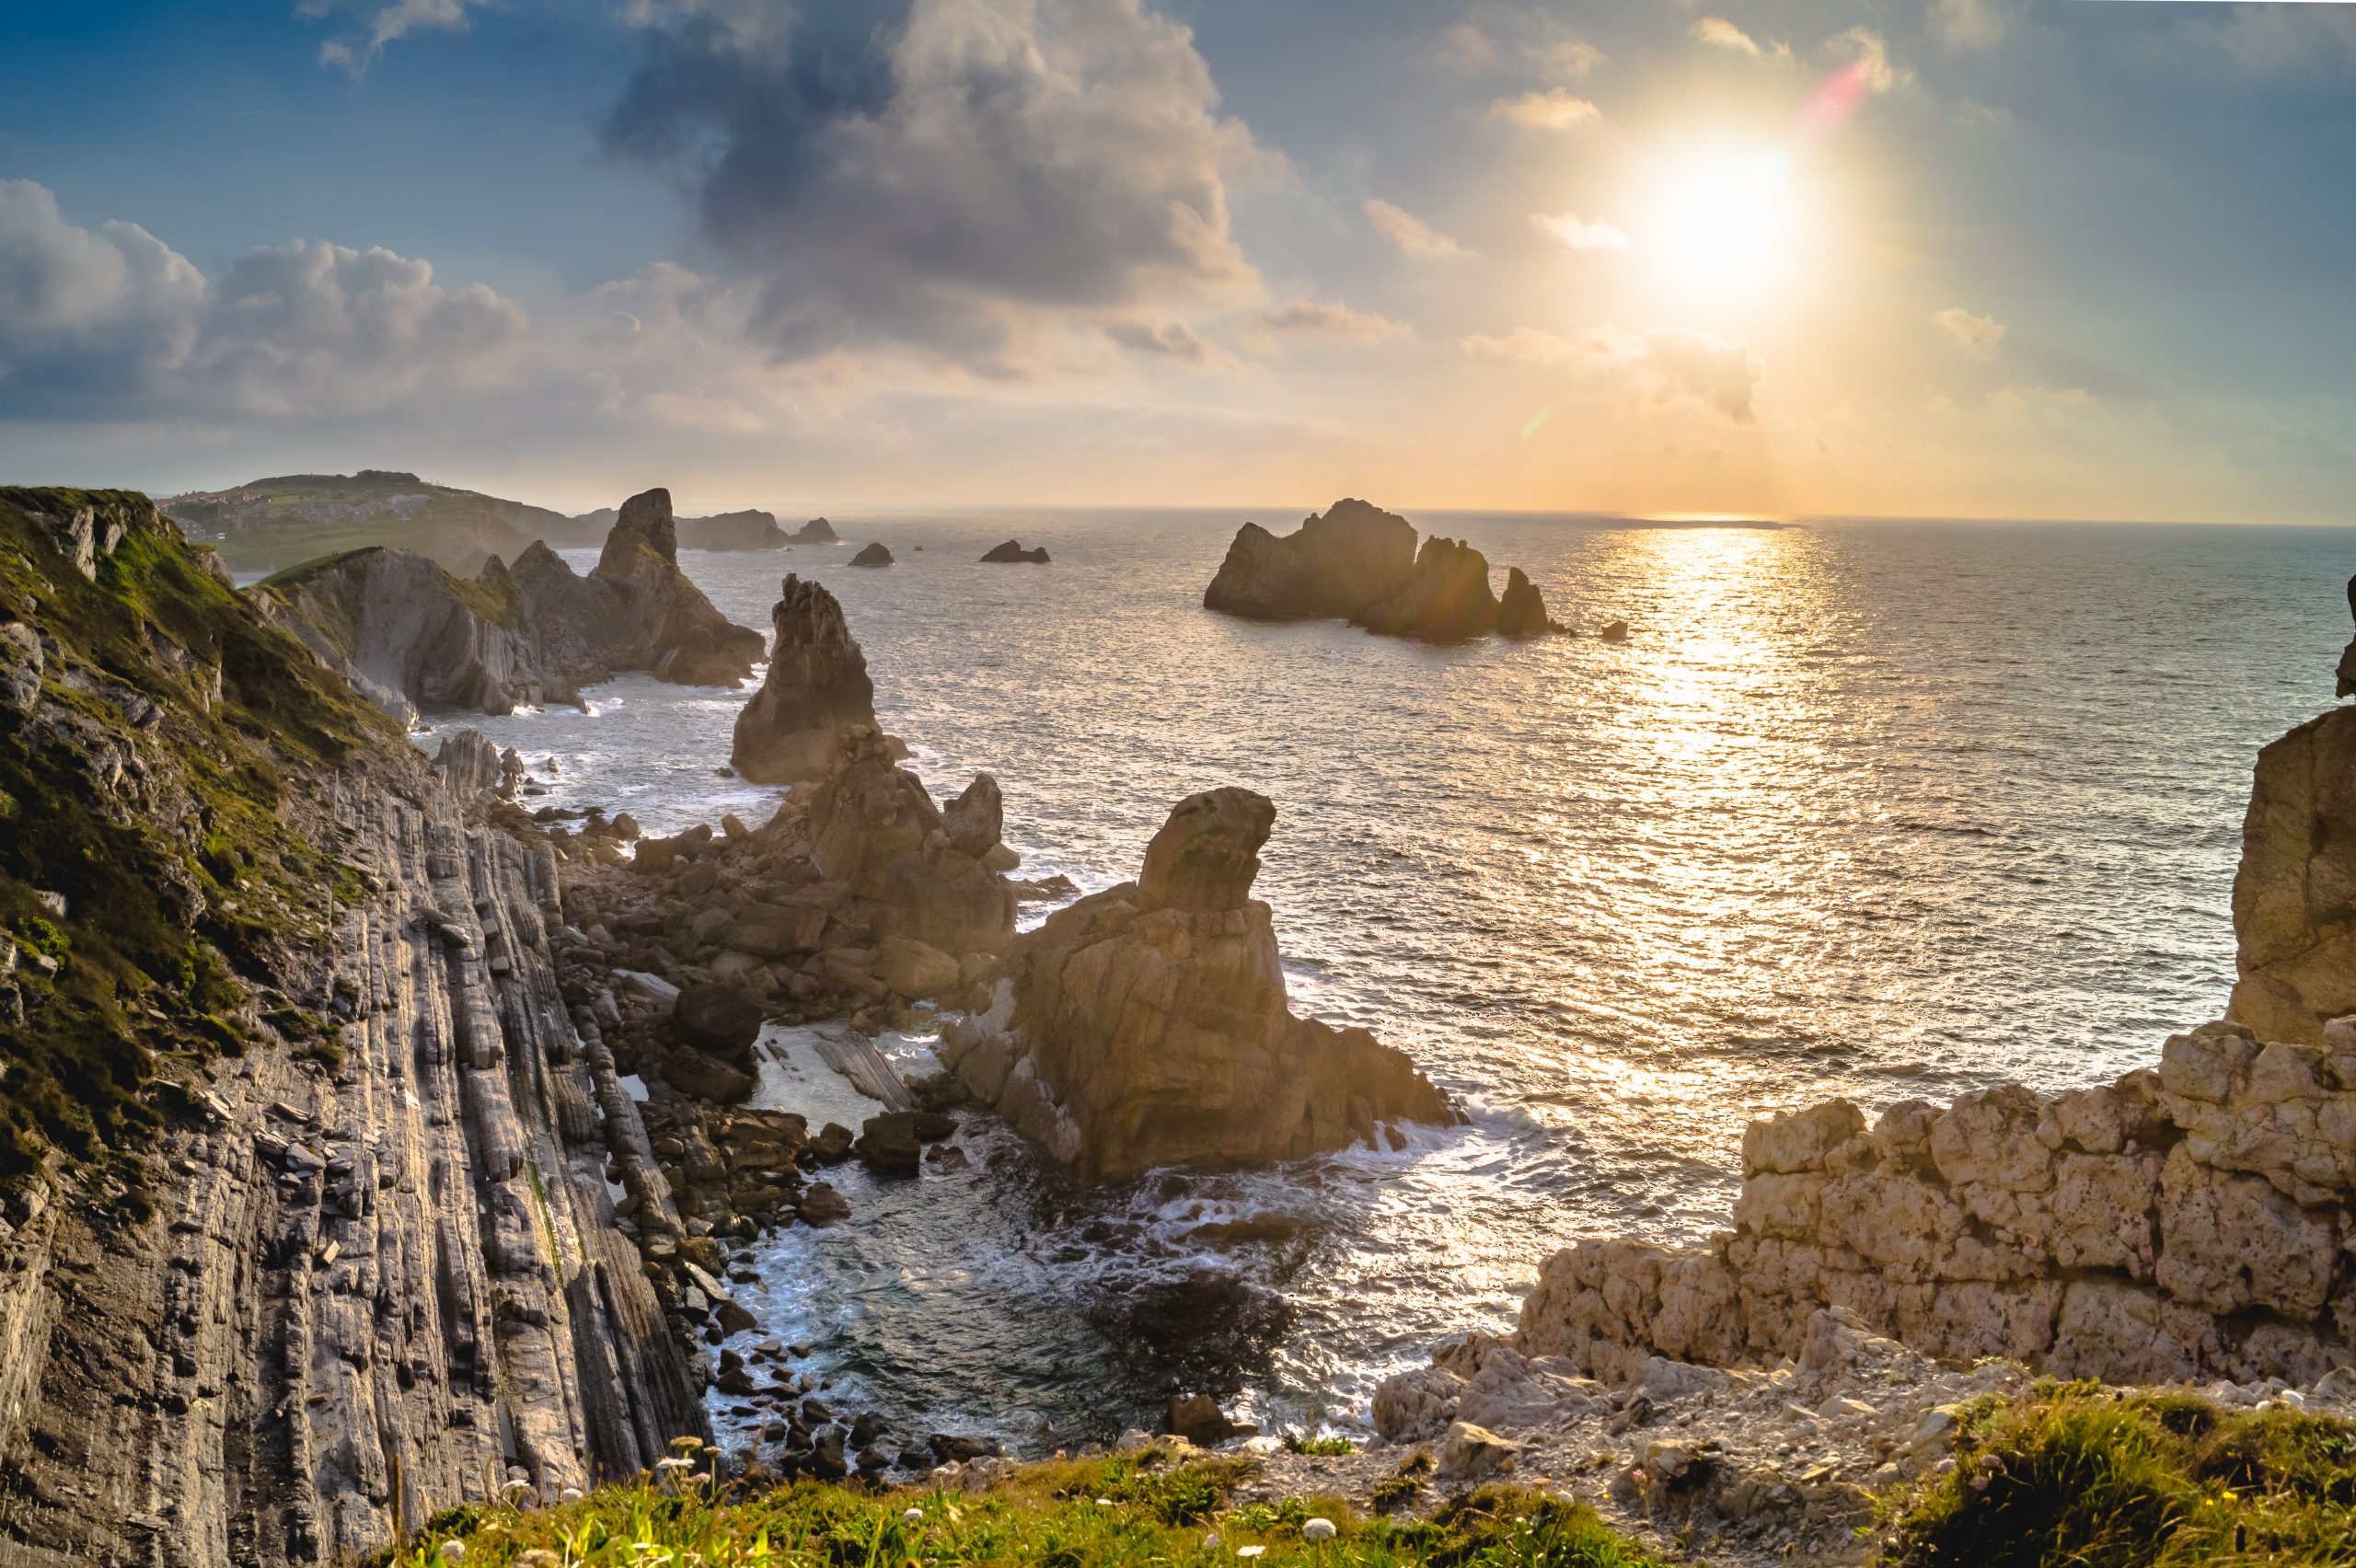 Sunset with sun, clouds and calm sea on cliffs of Costa Quebrada, Liencres, Spain